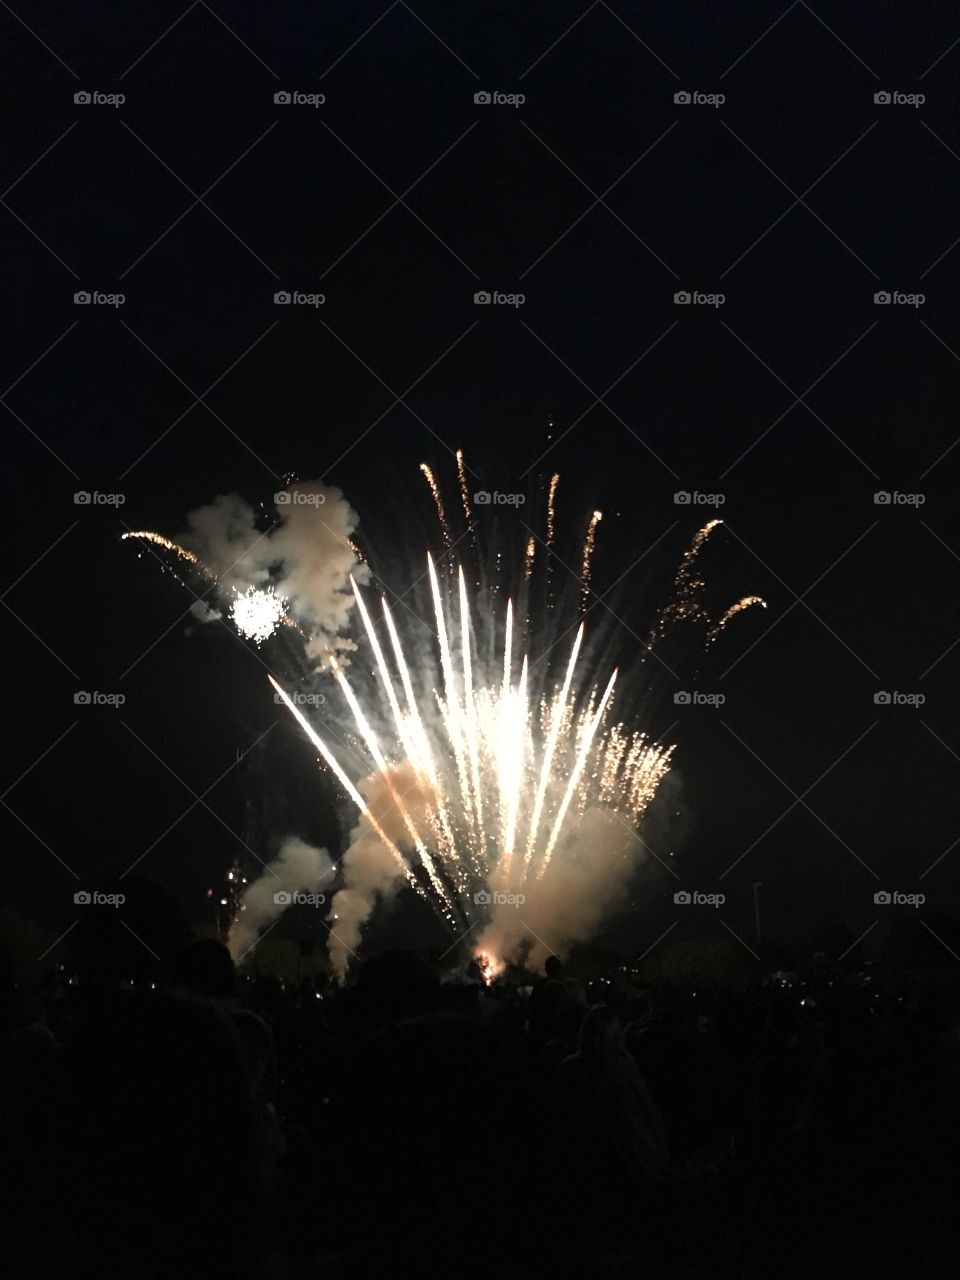 Fireworks exploding in the middle of the night.